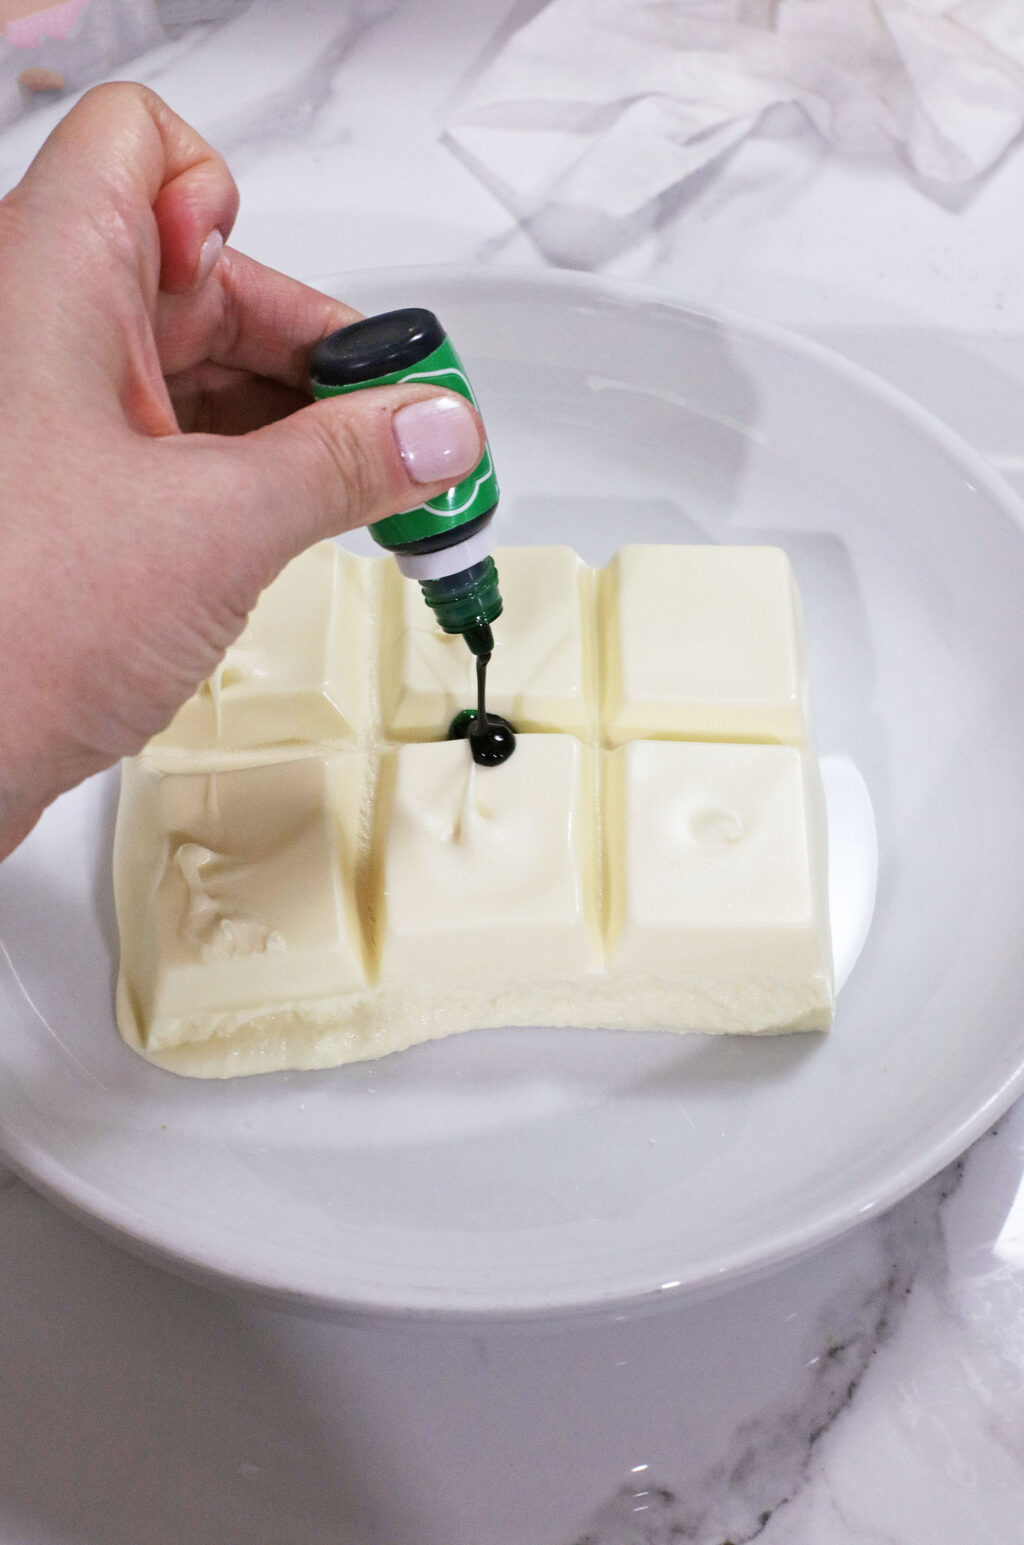 green food coloring being added to melted white almond bark